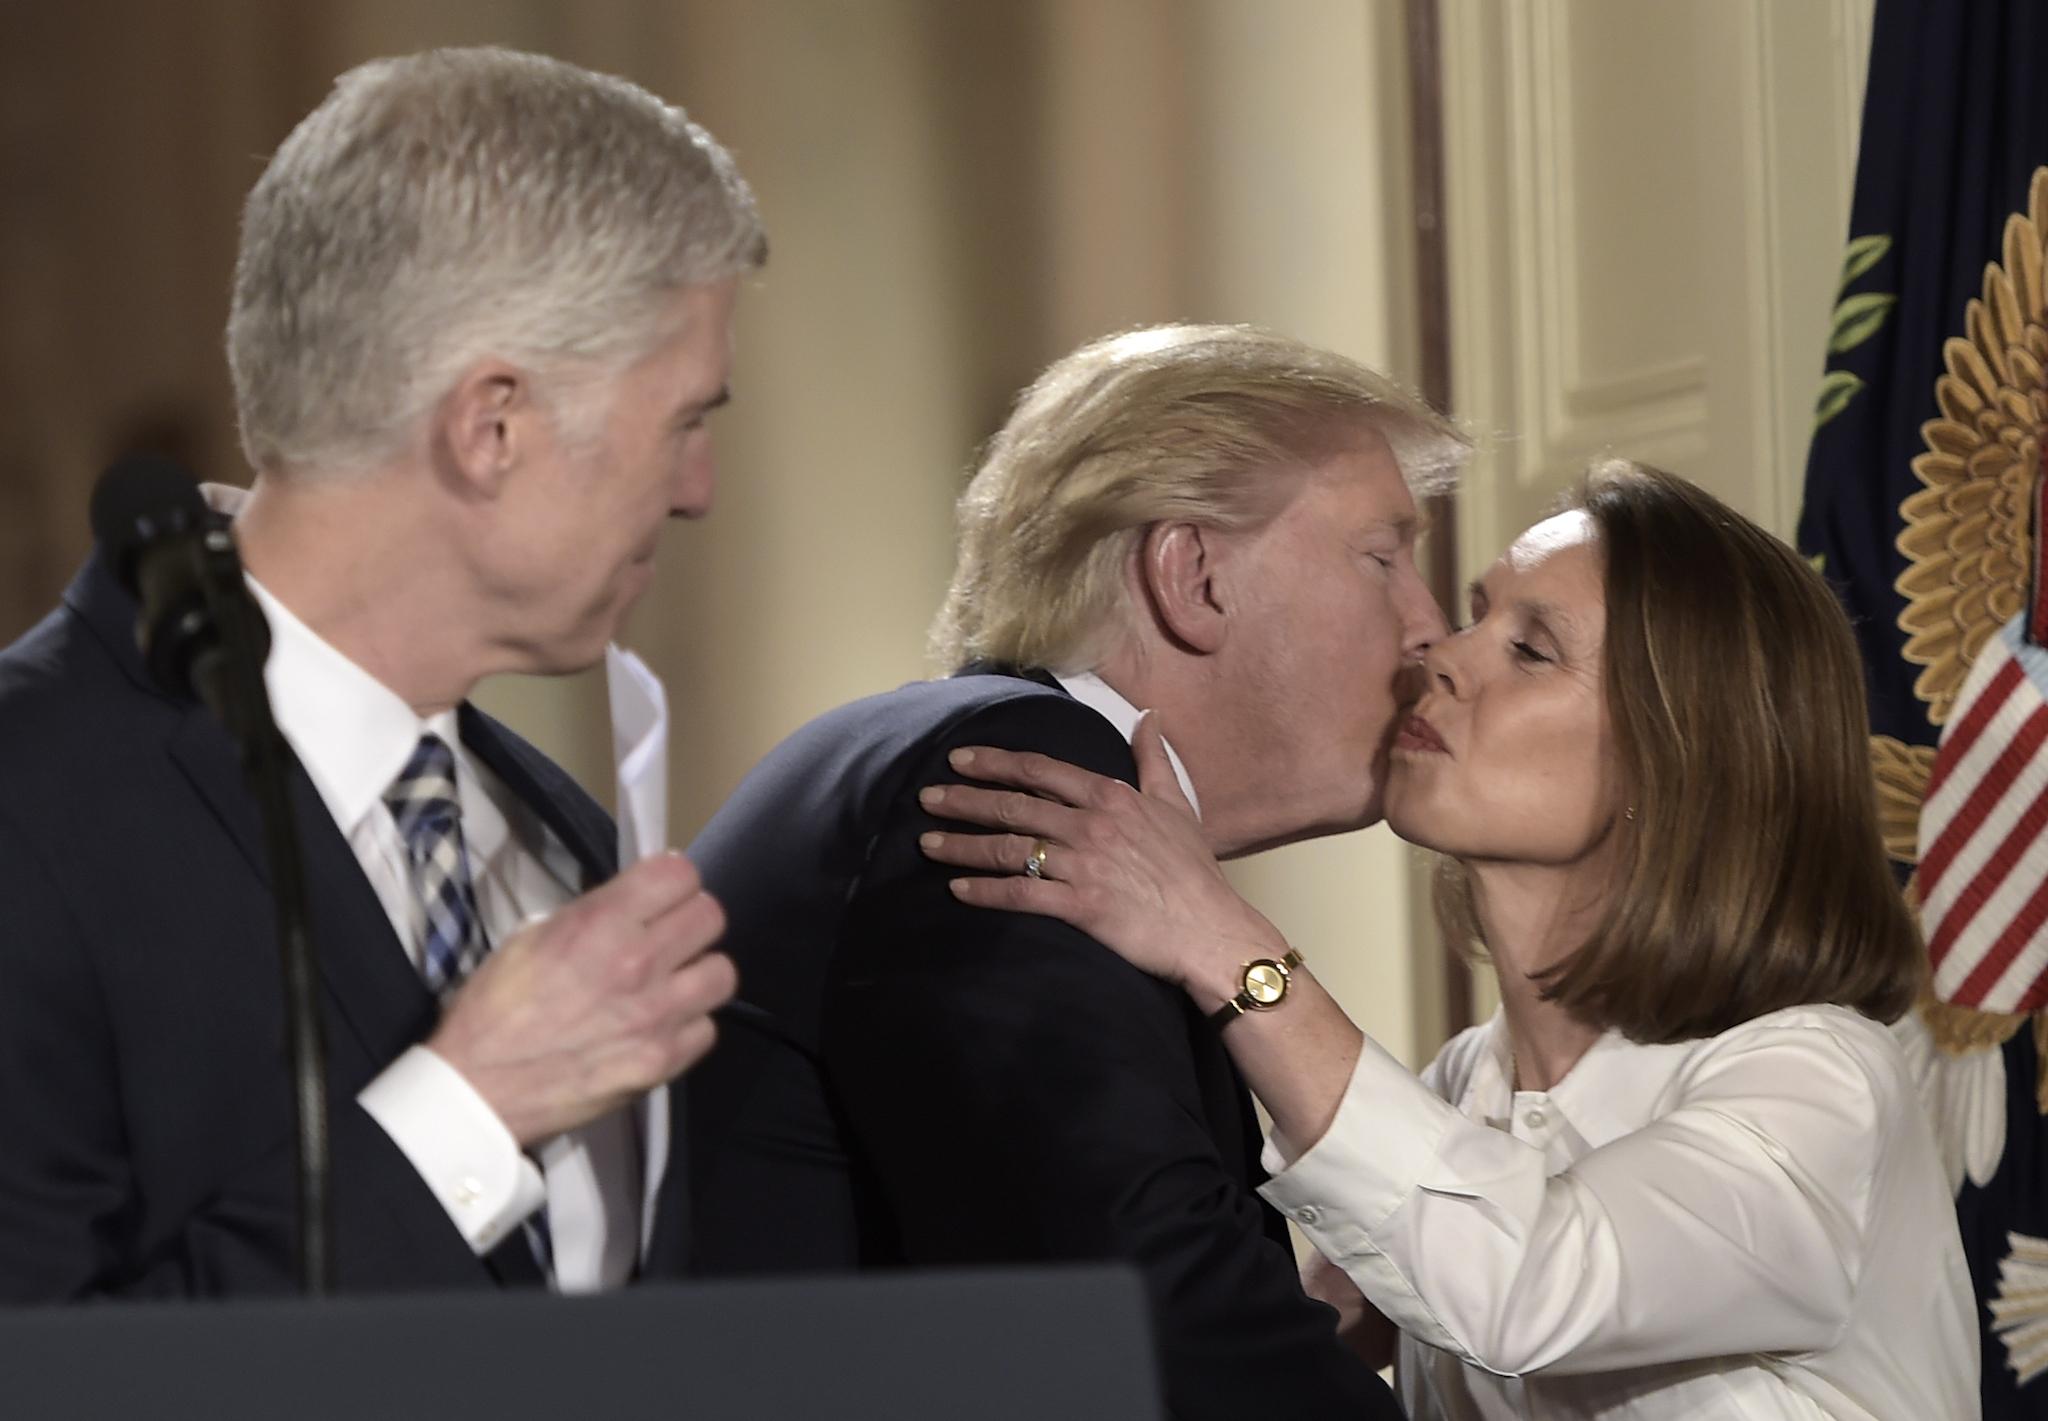 US President Donald Trump (C) greets Marie Louise, the wife of Judge Neil Gorsuch (L), after Trump nominated Gorsuch for the Supreme Court, at the White House in Washington, DC, on January 31, 2017